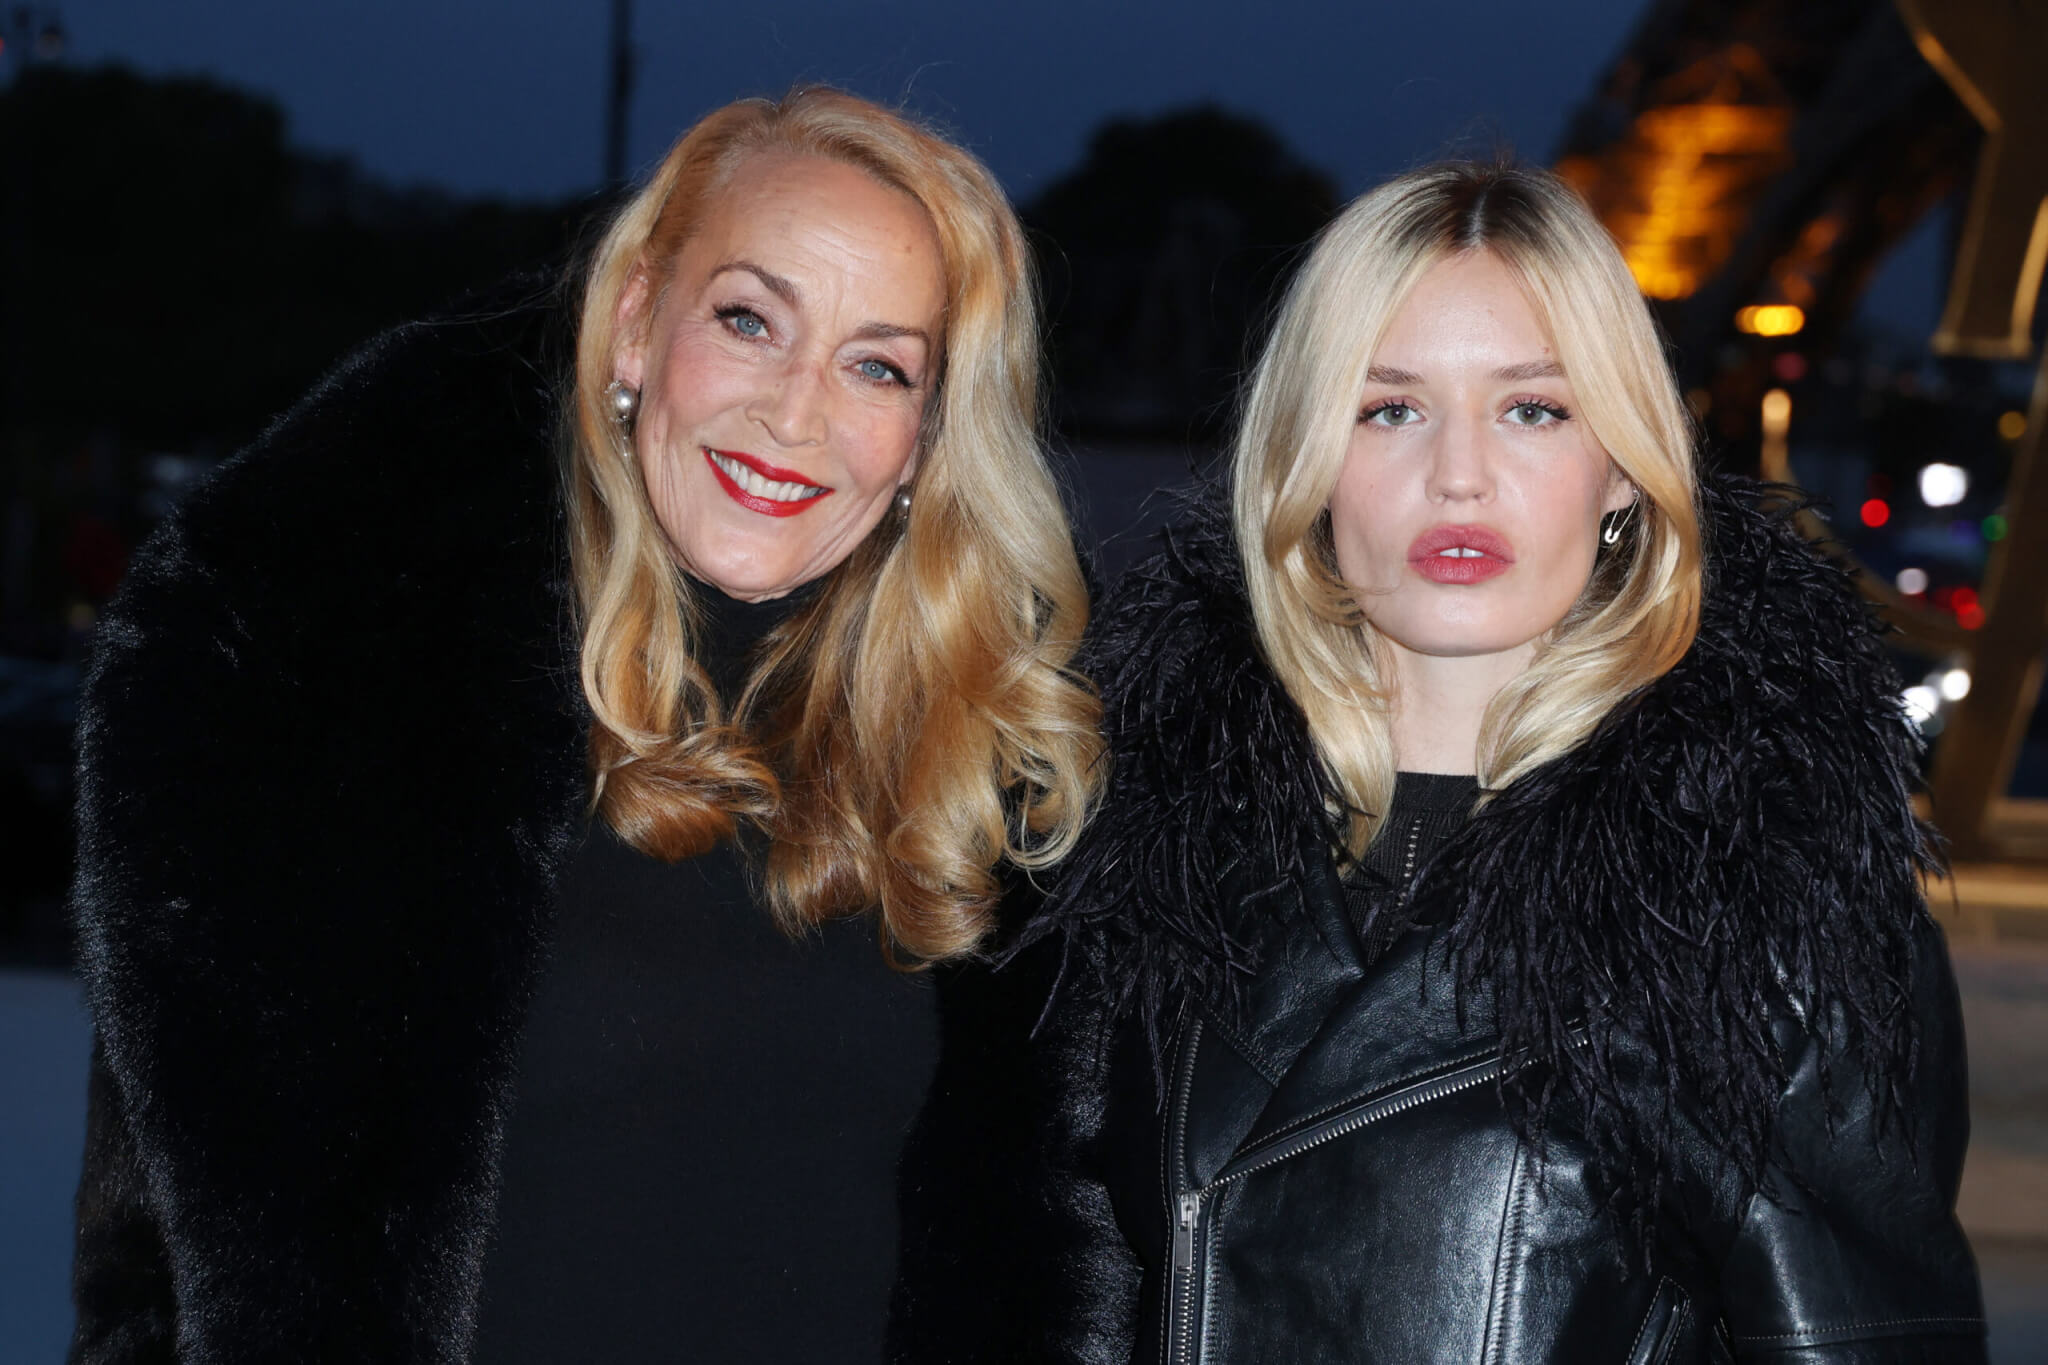 Jerry Hall and Georgia May Jagger attending the Saint Laurent Womenswear Spring/Summer 2023 show as part of Paris Fashion Week in Paris, France on September 27, 2022.